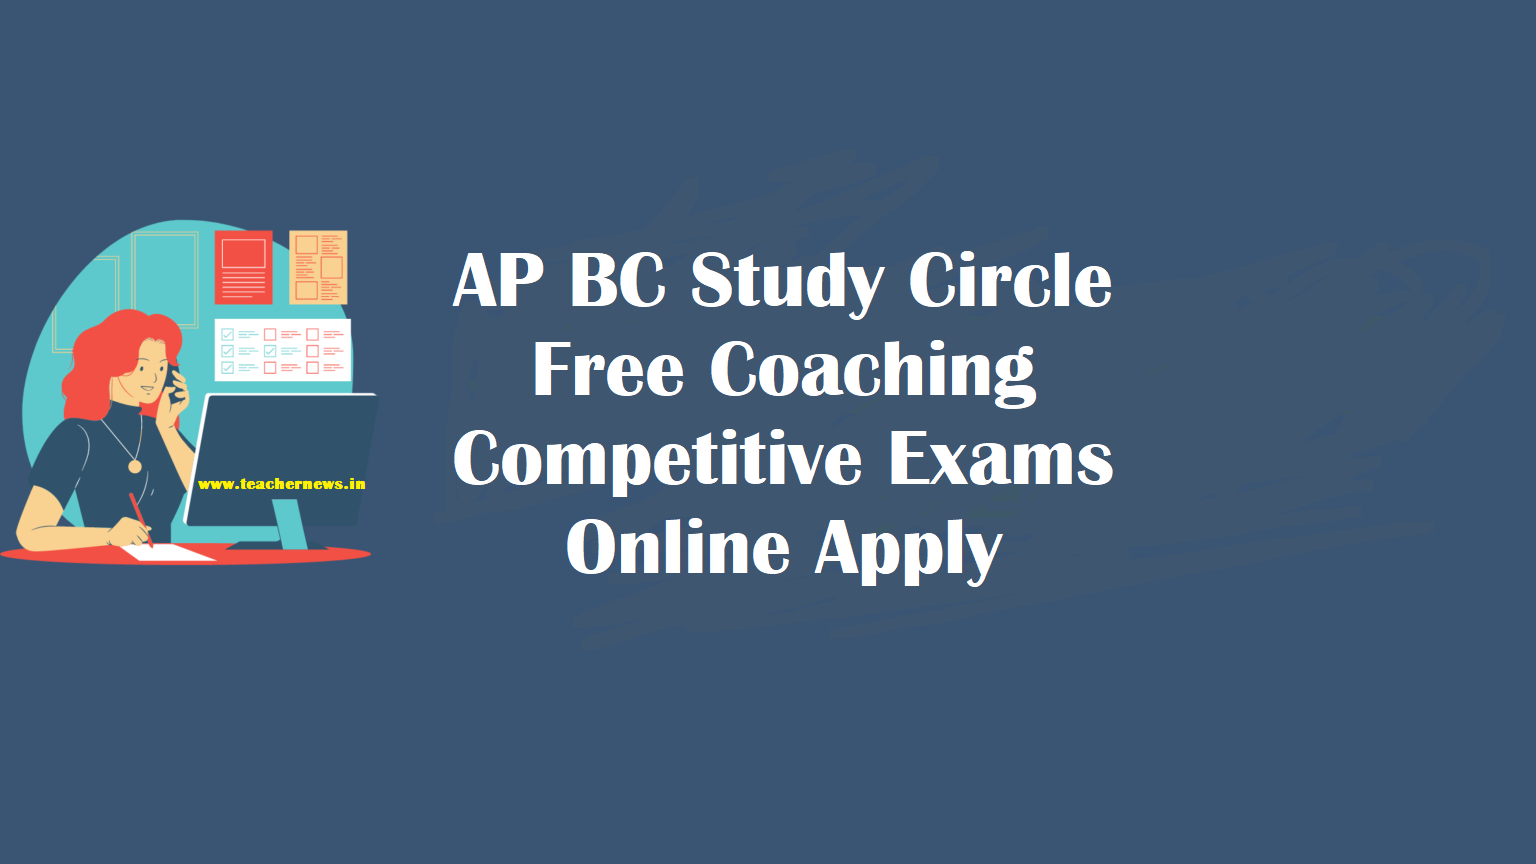 AP BC Study Circle Free Coaching Competitive Exams - Online Apply